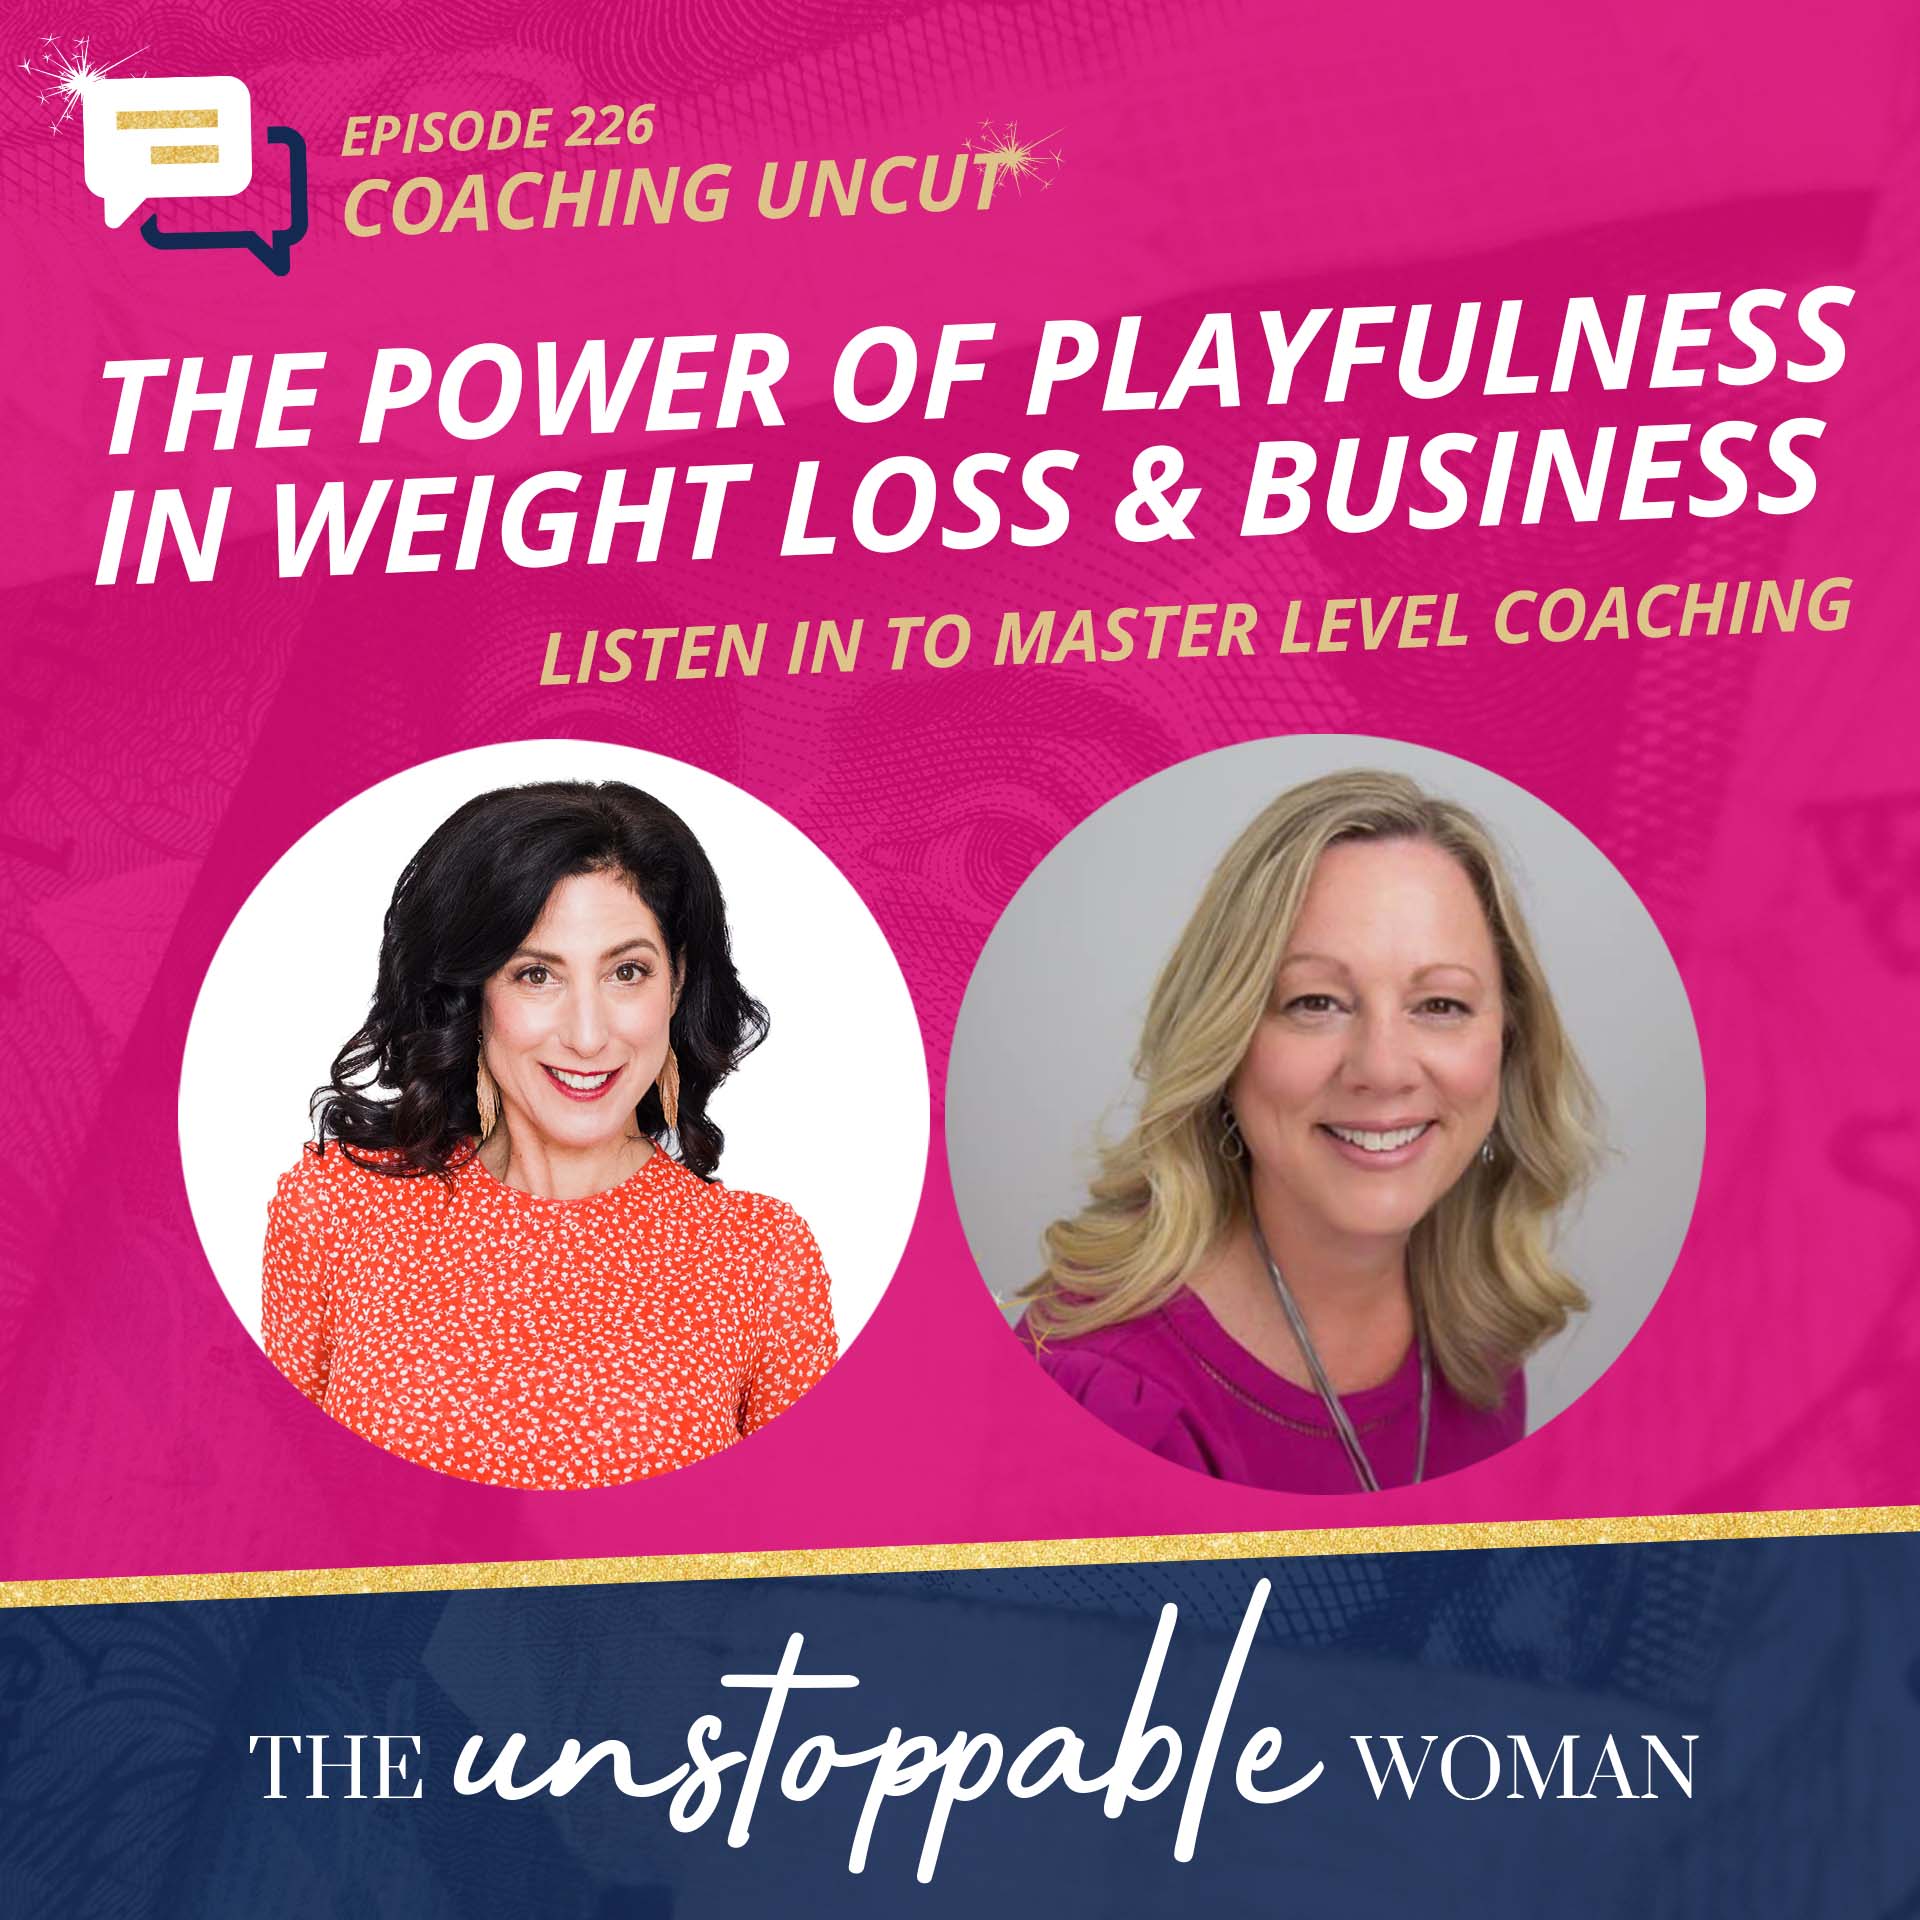 The Power of Playfulness in Weight Loss & Business | Coaching Uncut